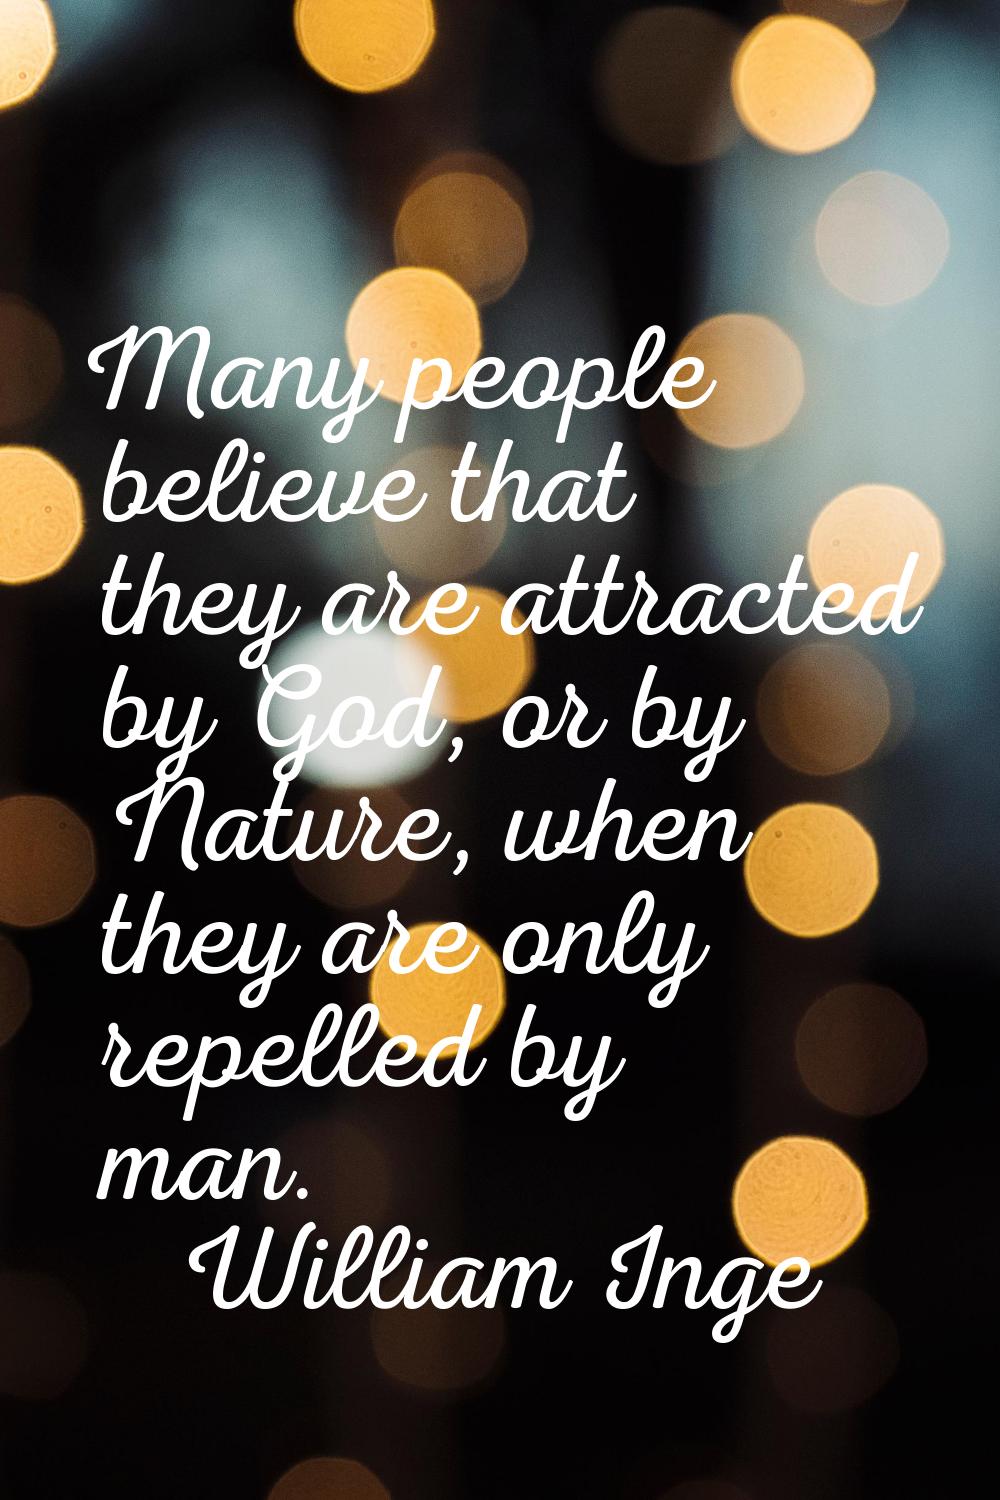 Many people believe that they are attracted by God, or by Nature, when they are only repelled by ma